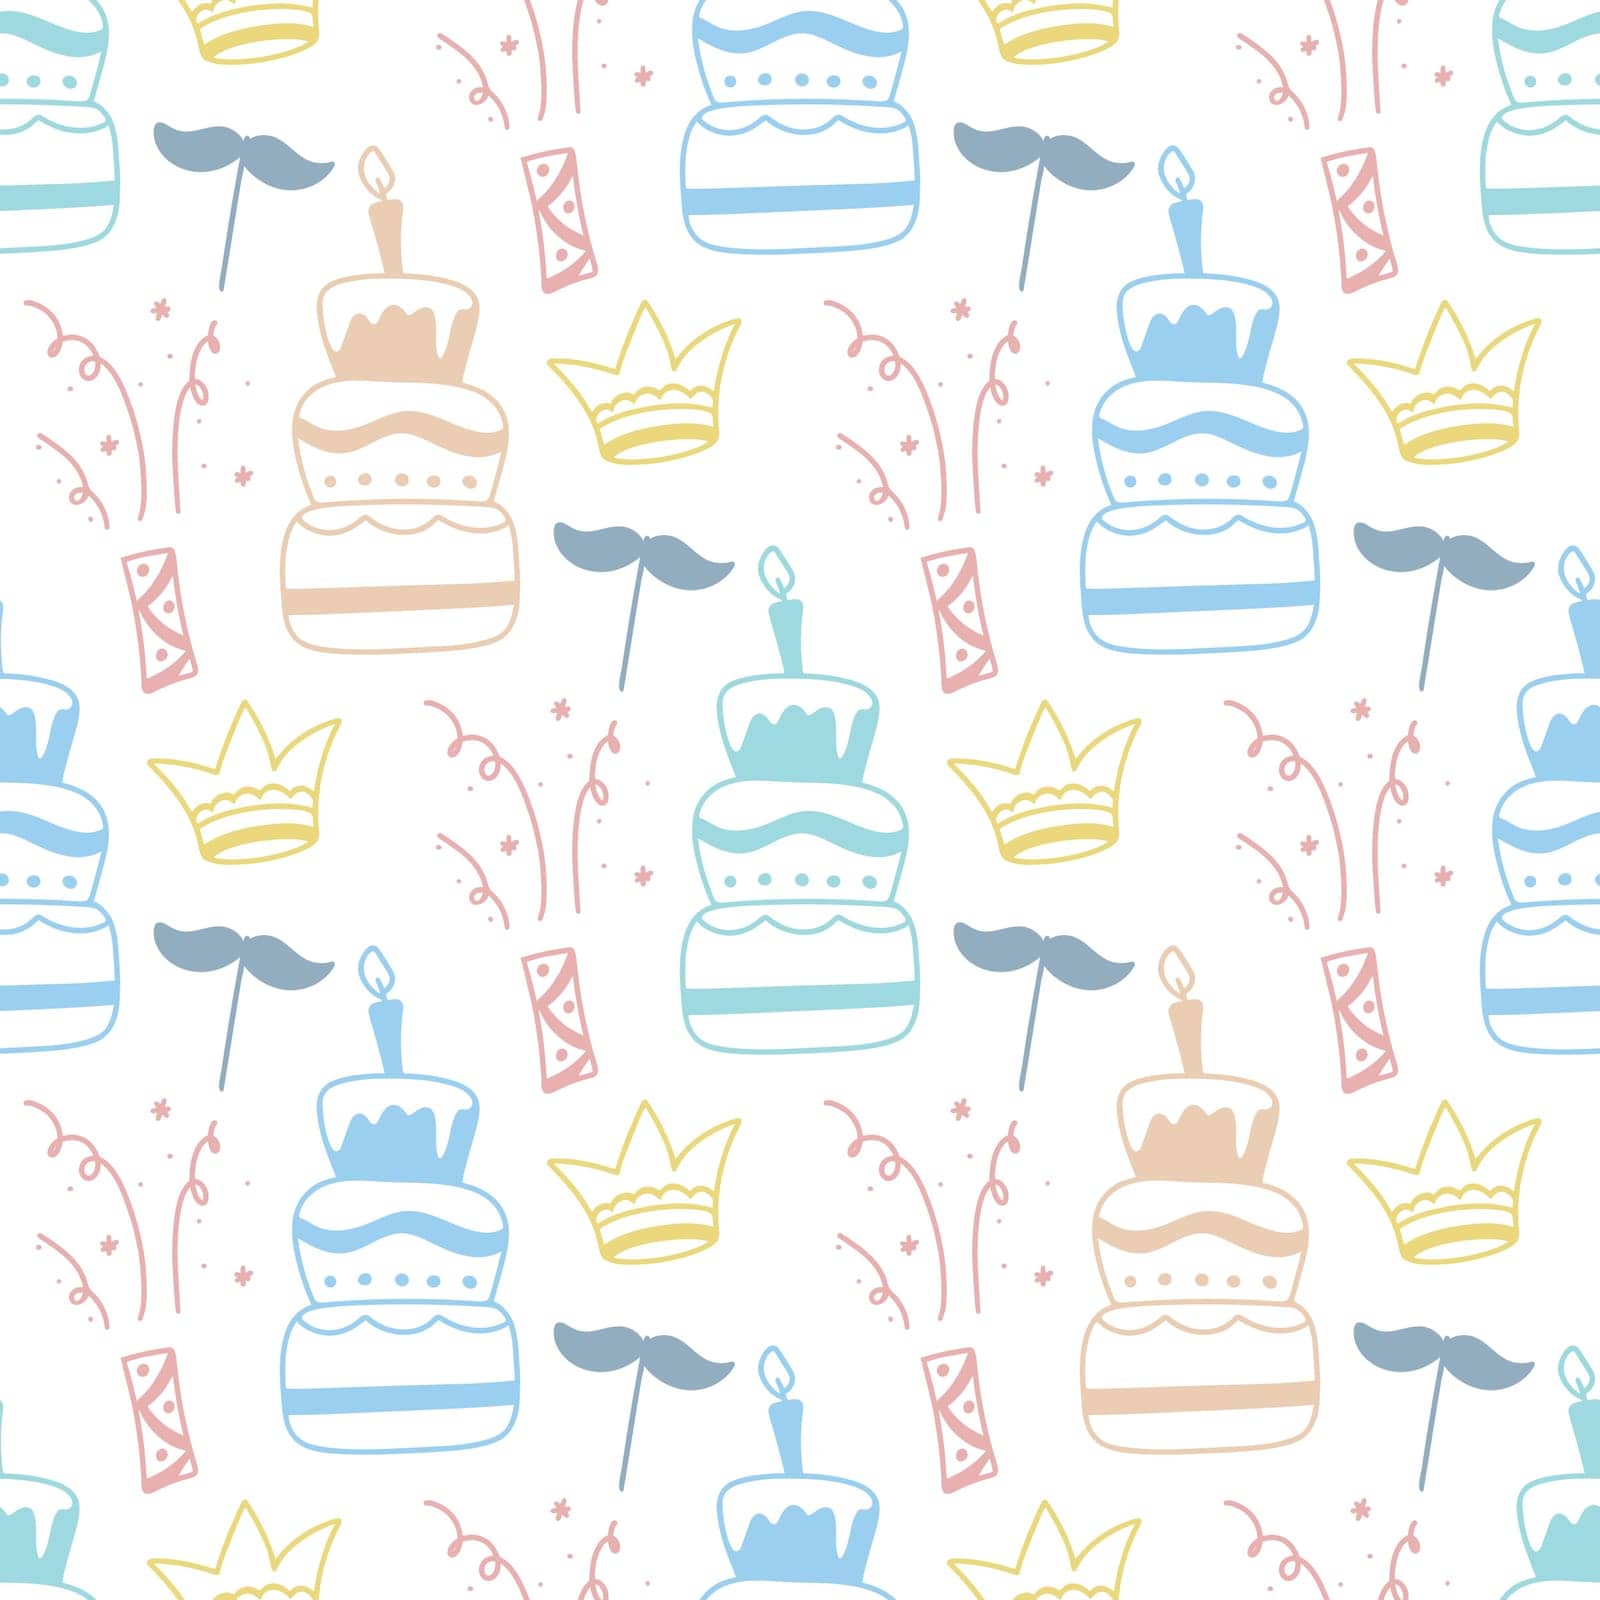 Birthday doodle seamless pattern. Festive party scribble elements background. Sheet for textile, wrapping paper, wallpaper and design, vector graphics